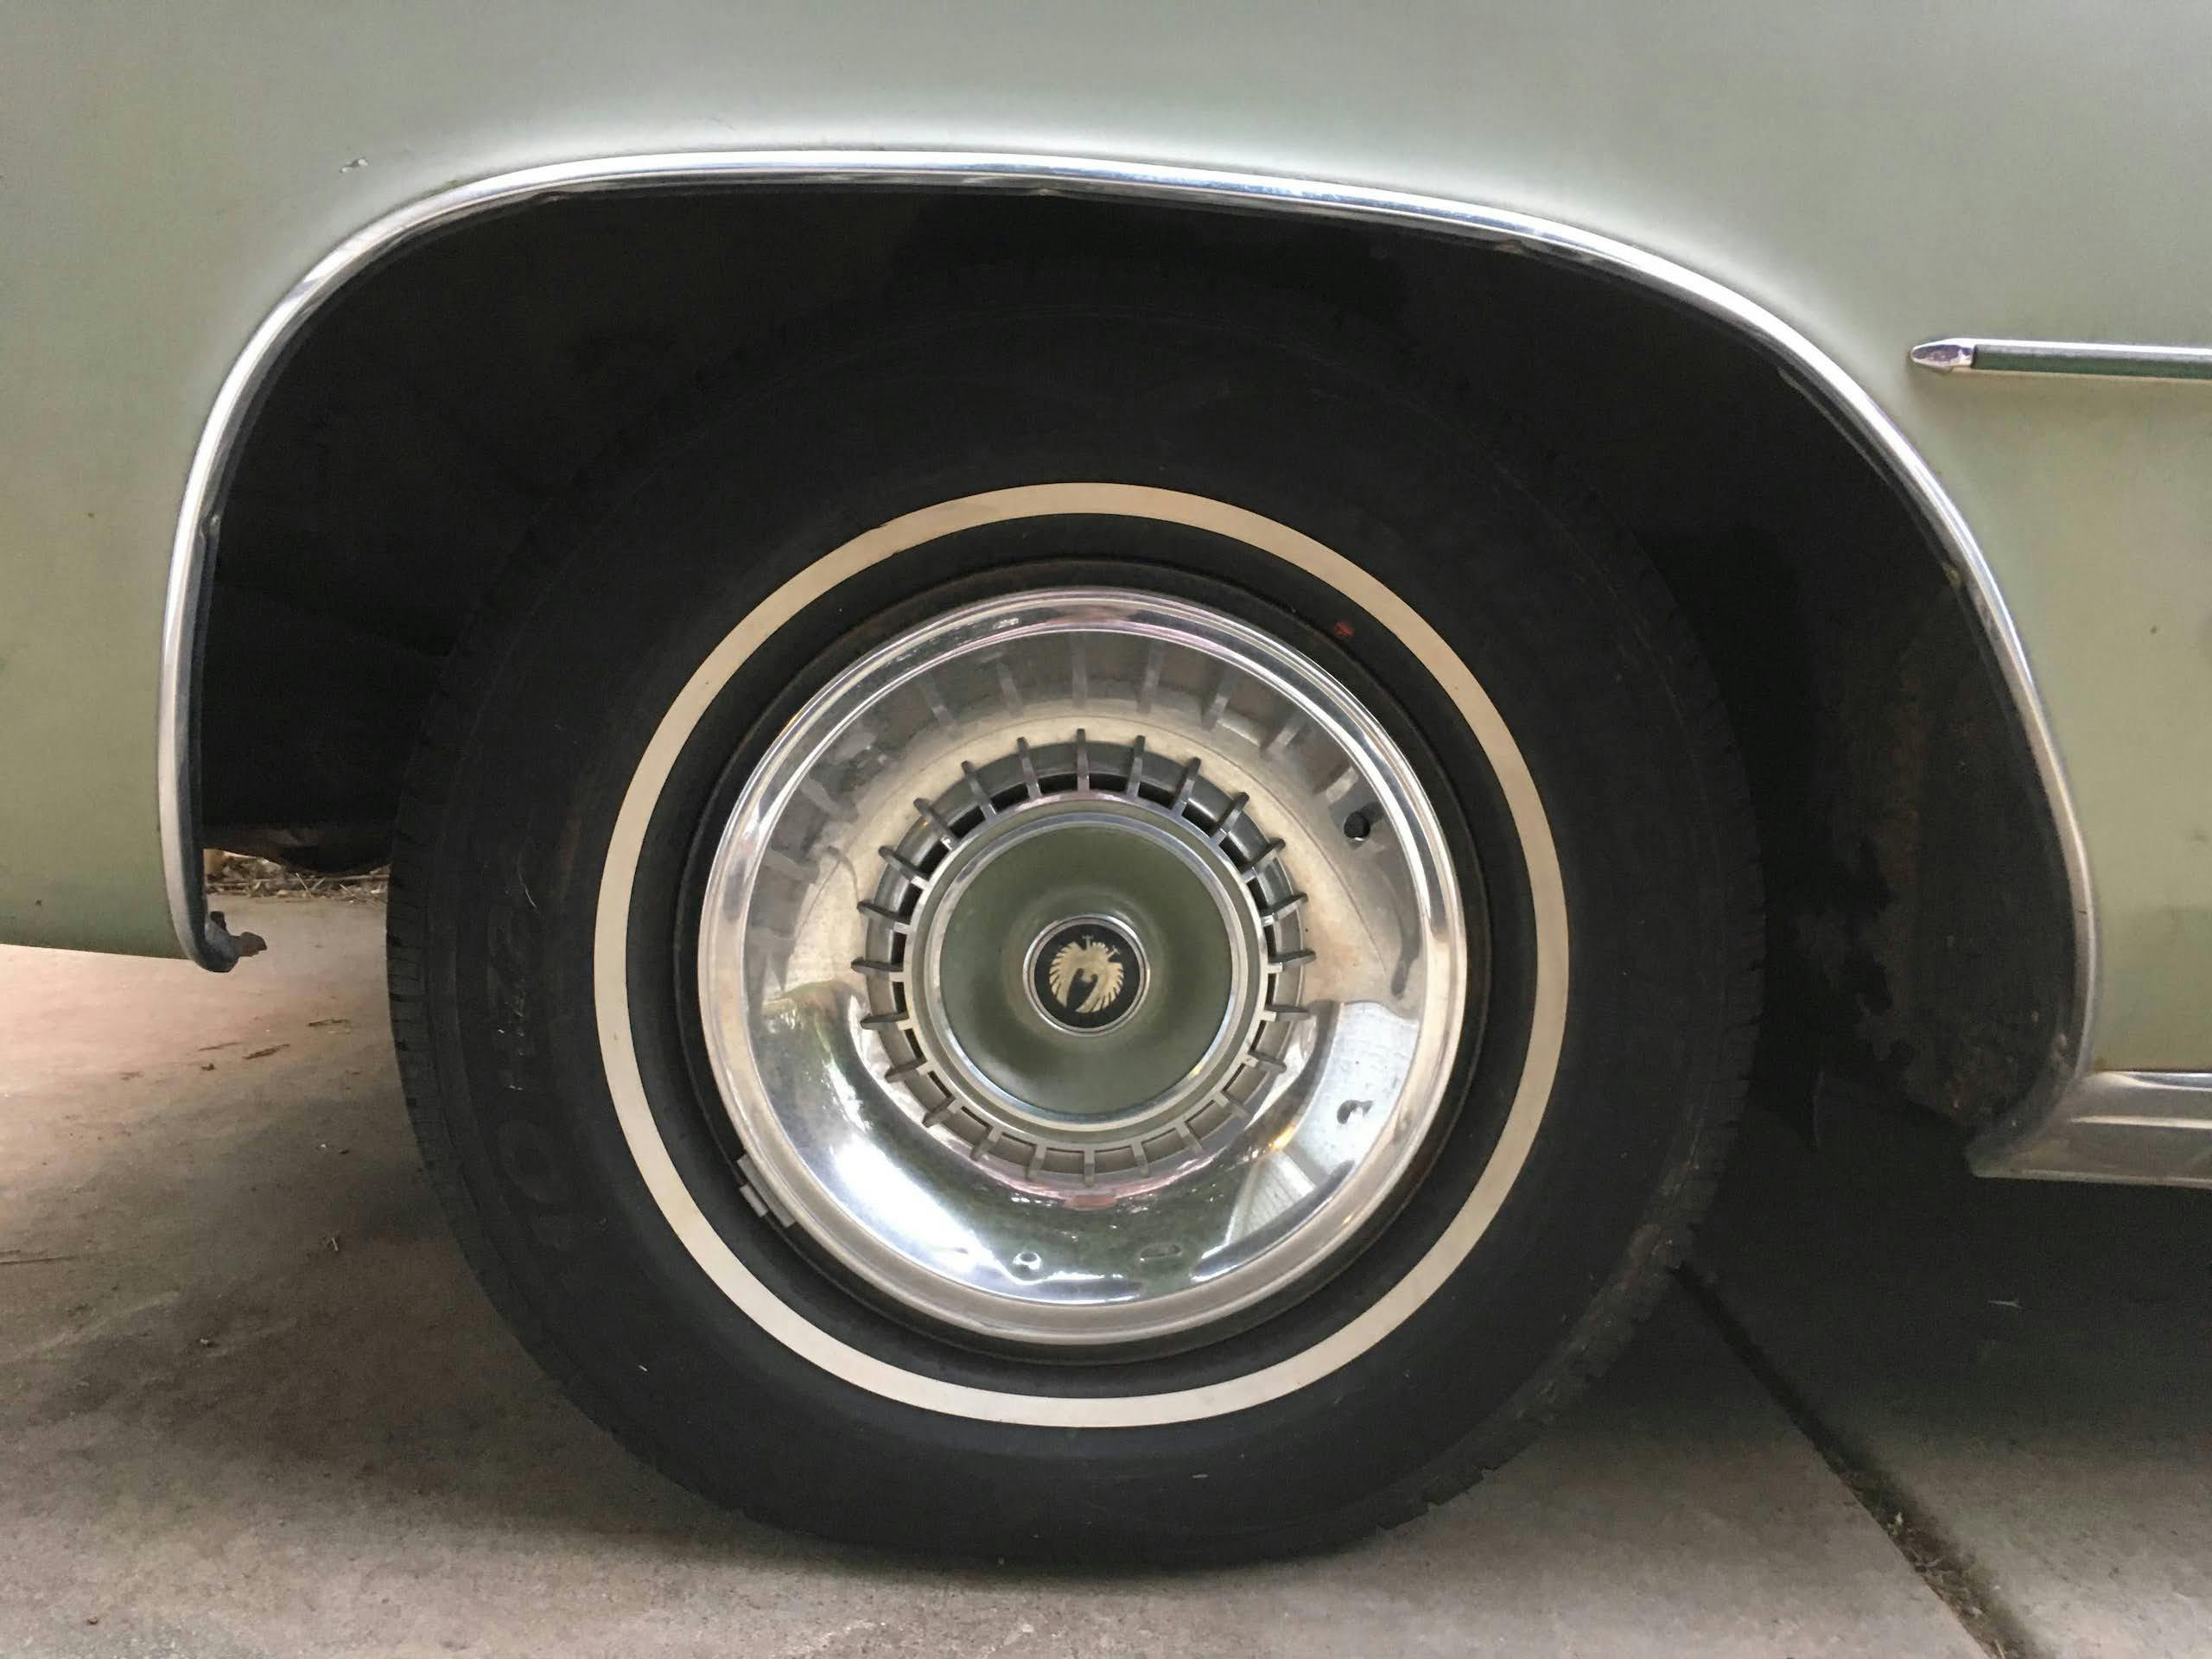 1964 Imperial Crown wheel tire close